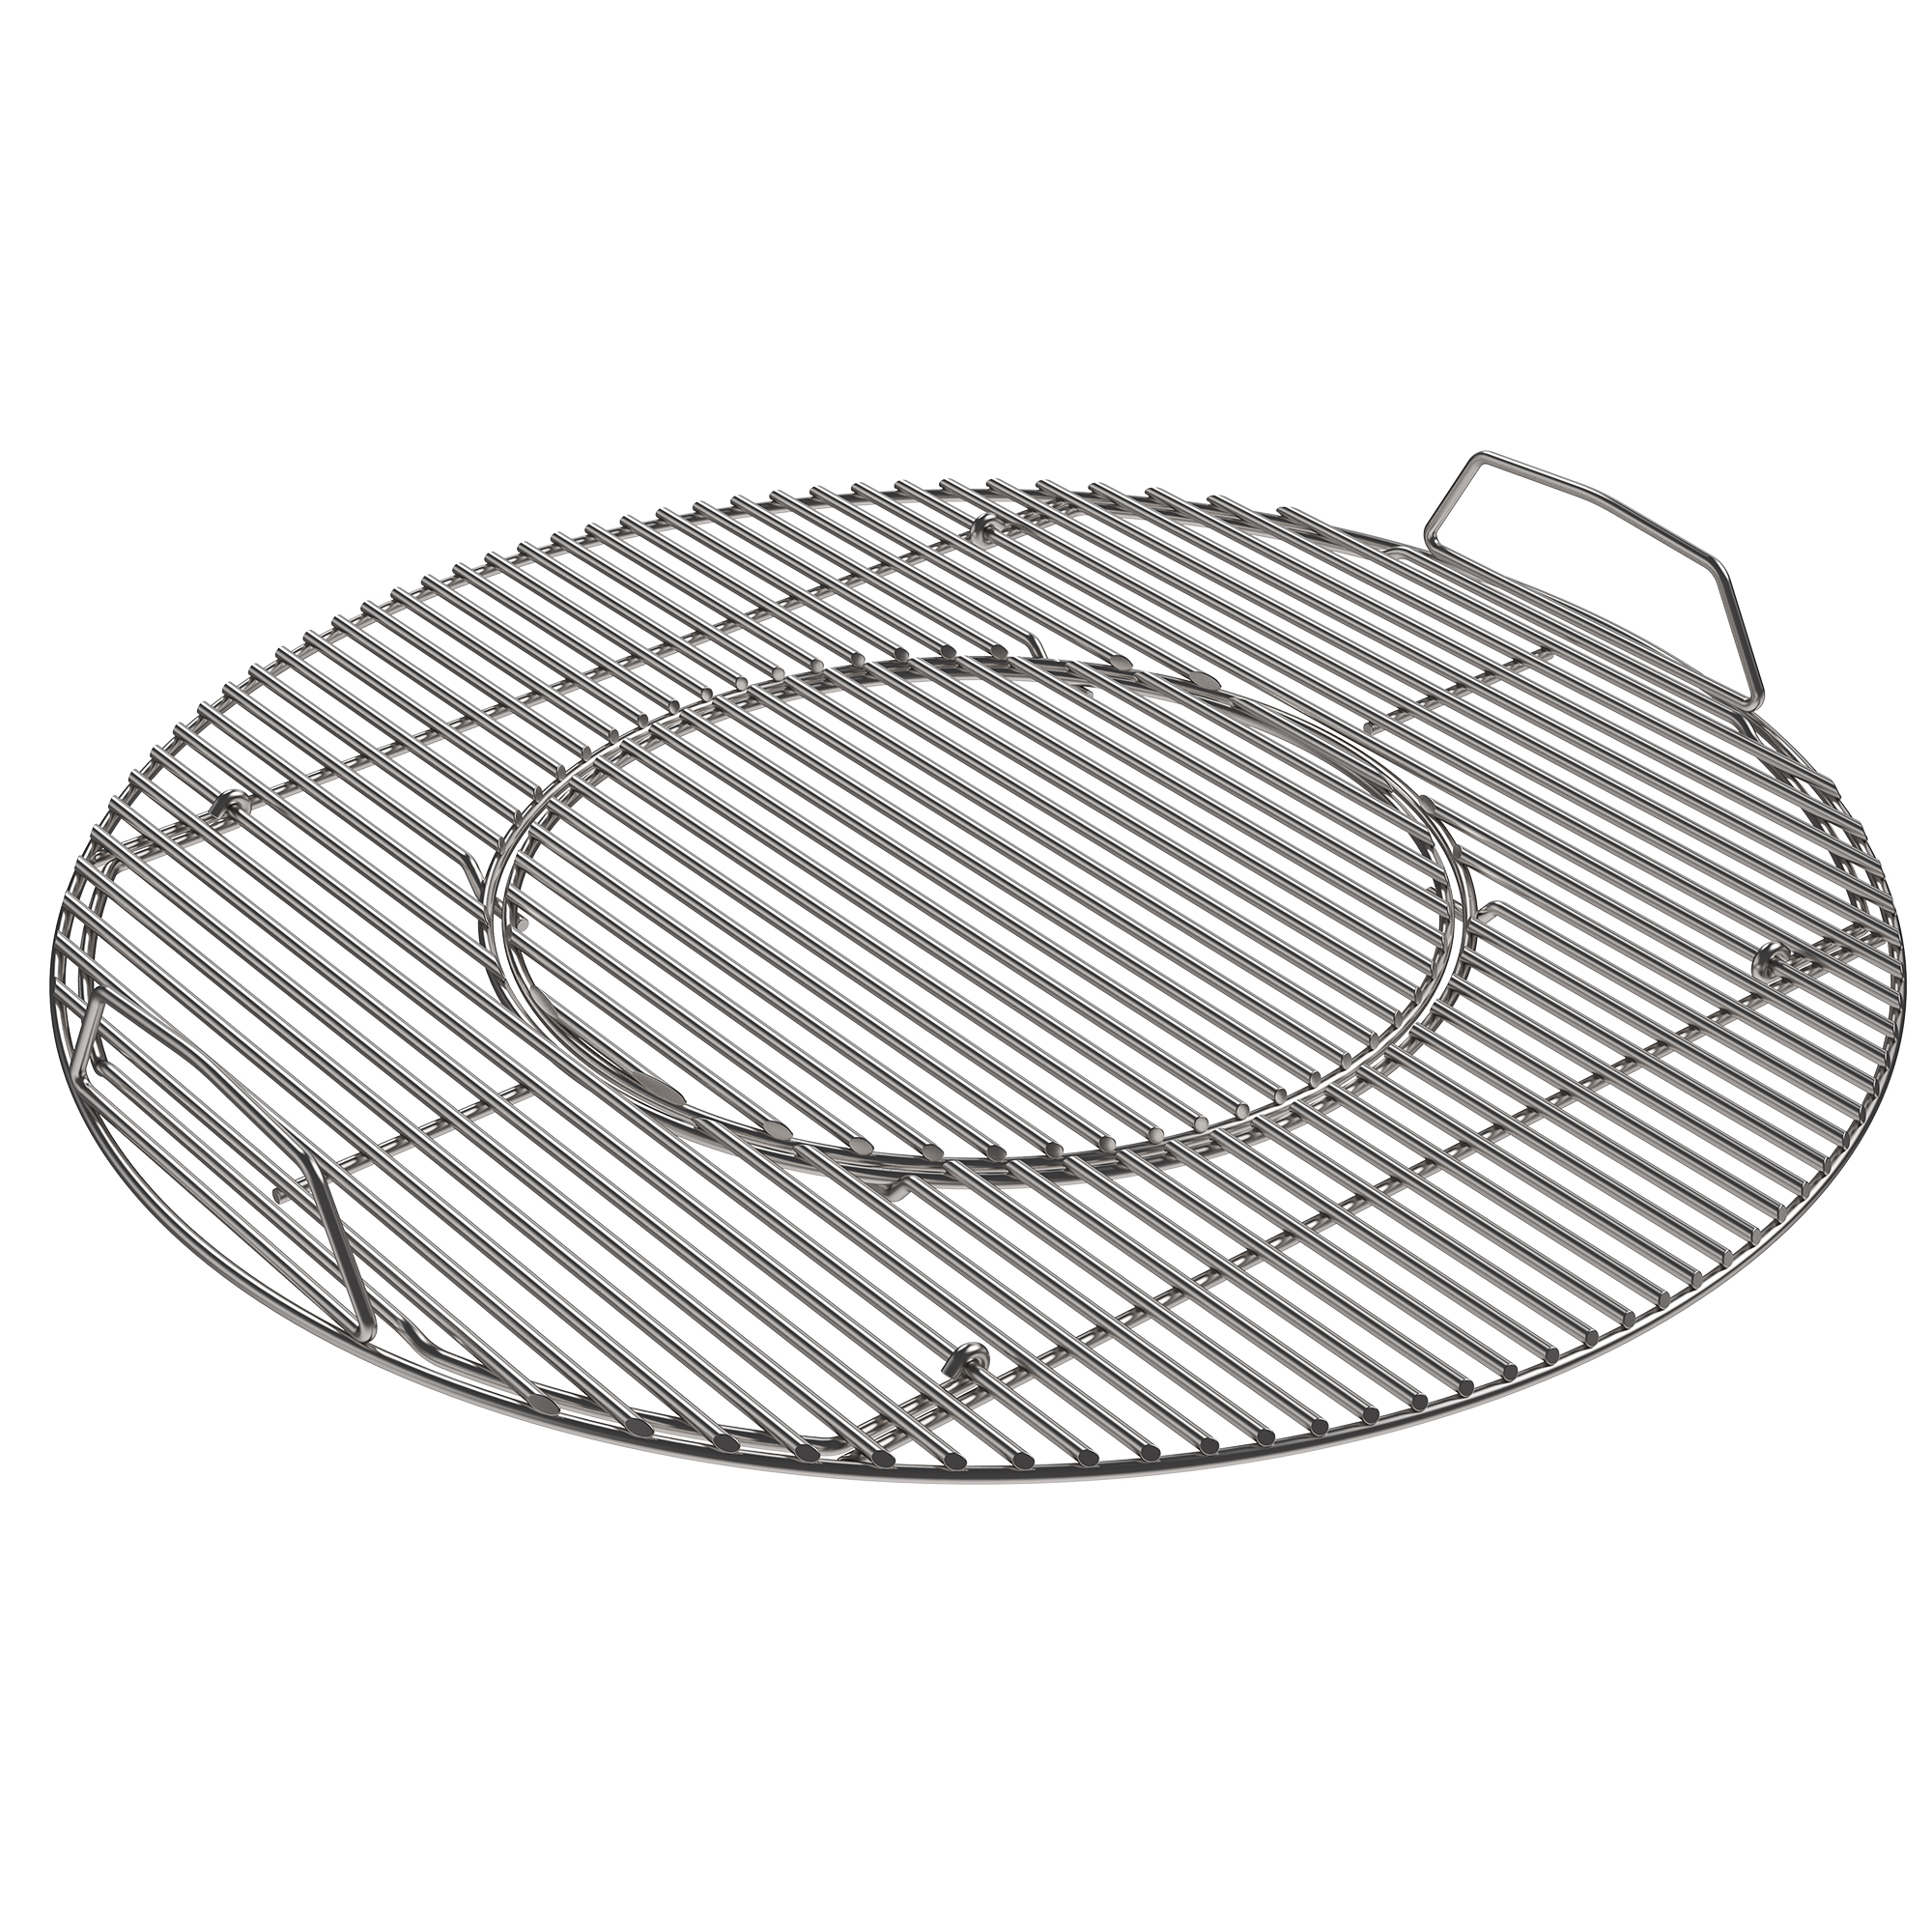 Stainless steel grill grate Vario+ for No.1 F60